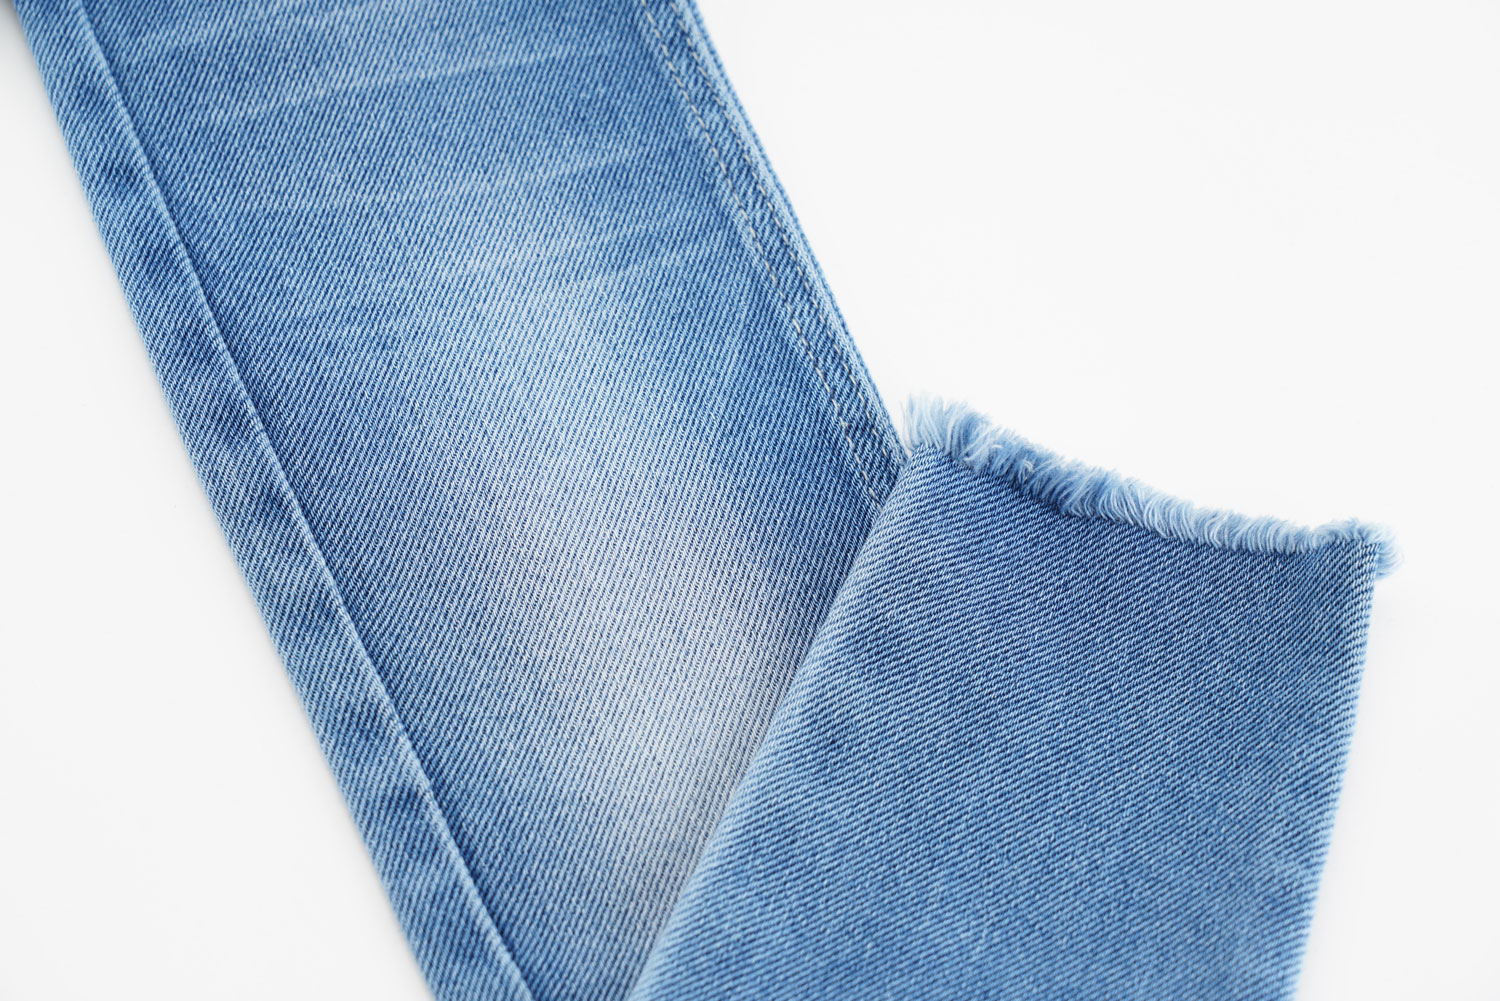 What's the Benefits of a Cotton Denim Supplier ? 1